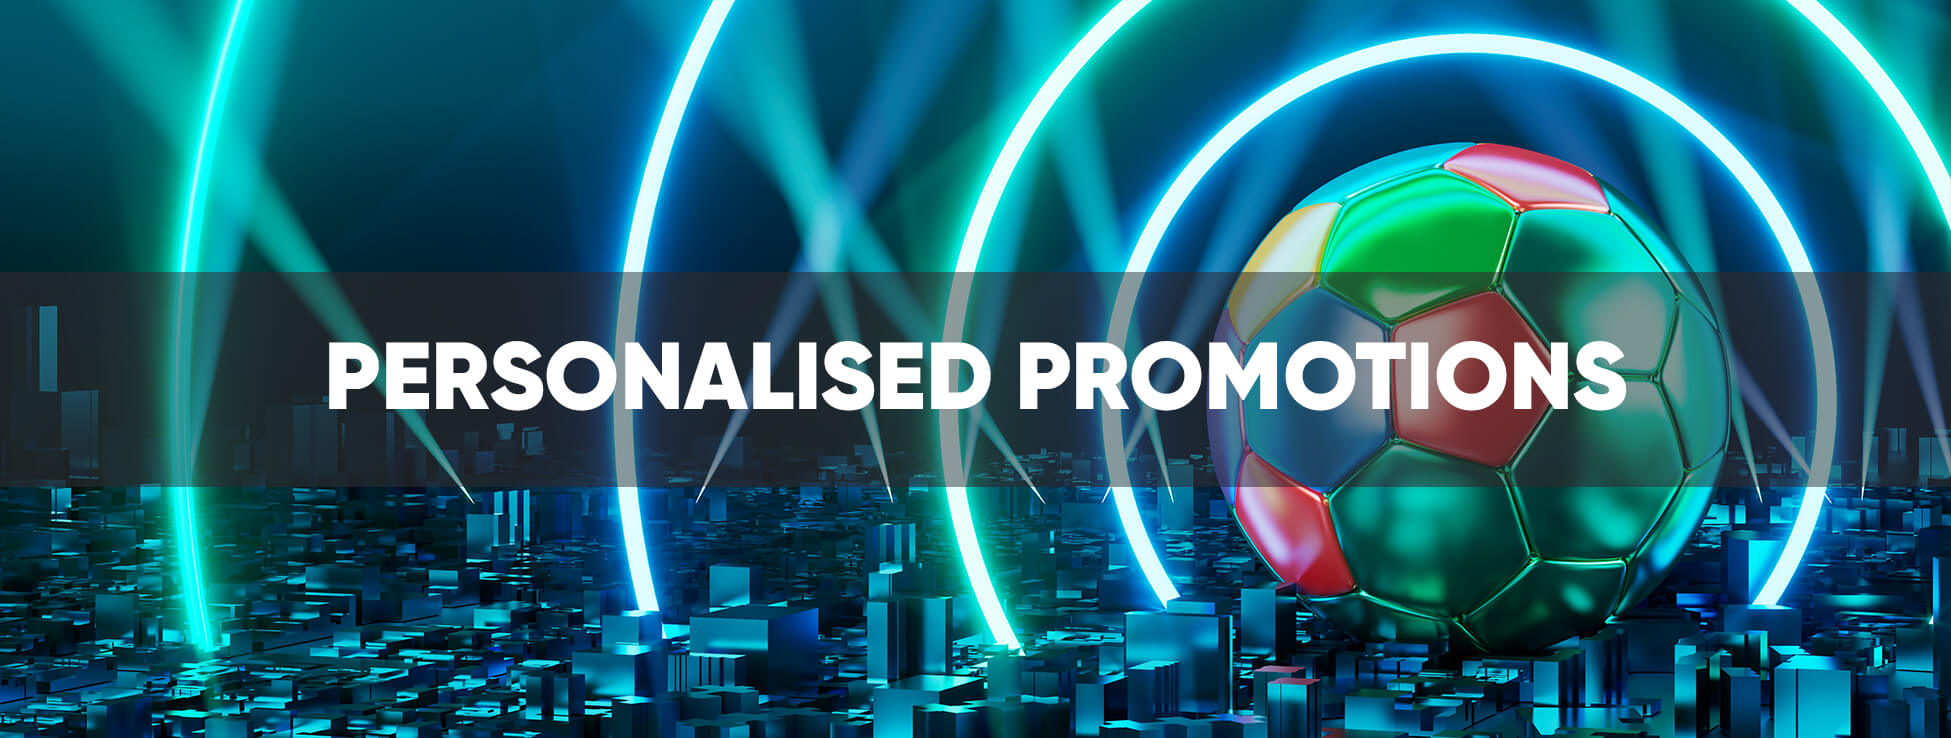 Sportingbet sends you personalised offers on a regular basis